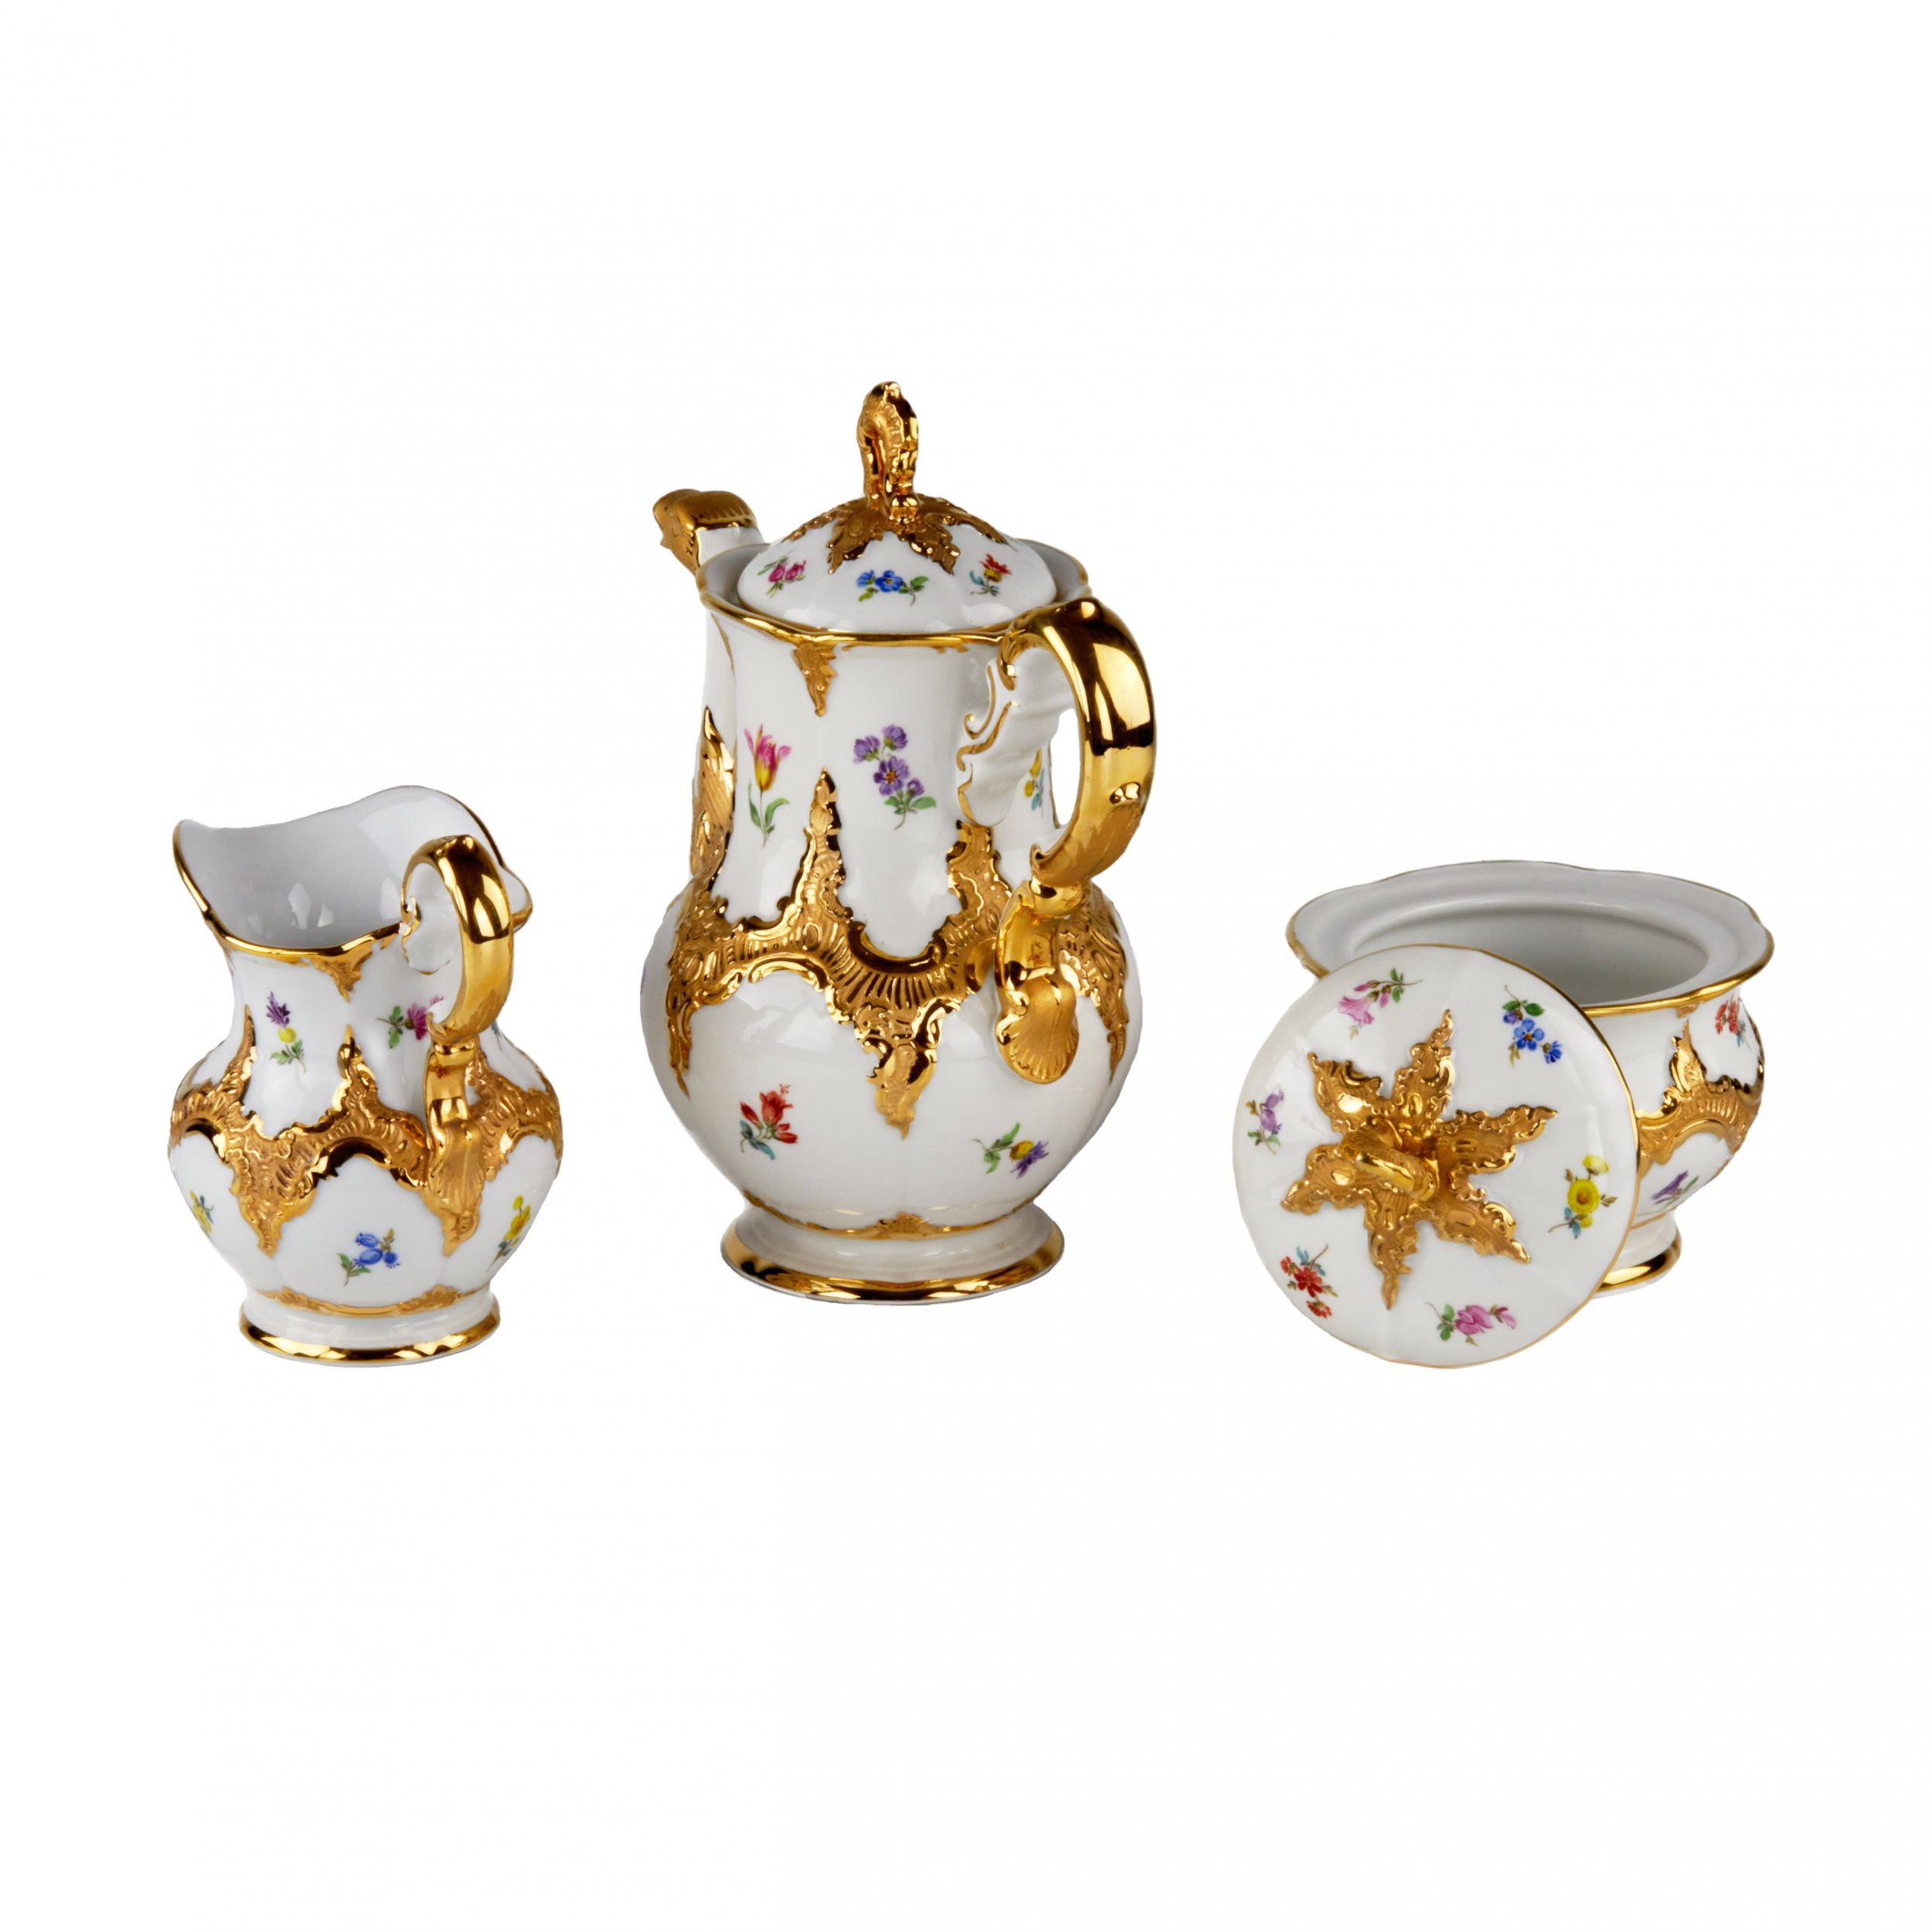 Meissen coffee service for 6 persons. - Image 7 of 9